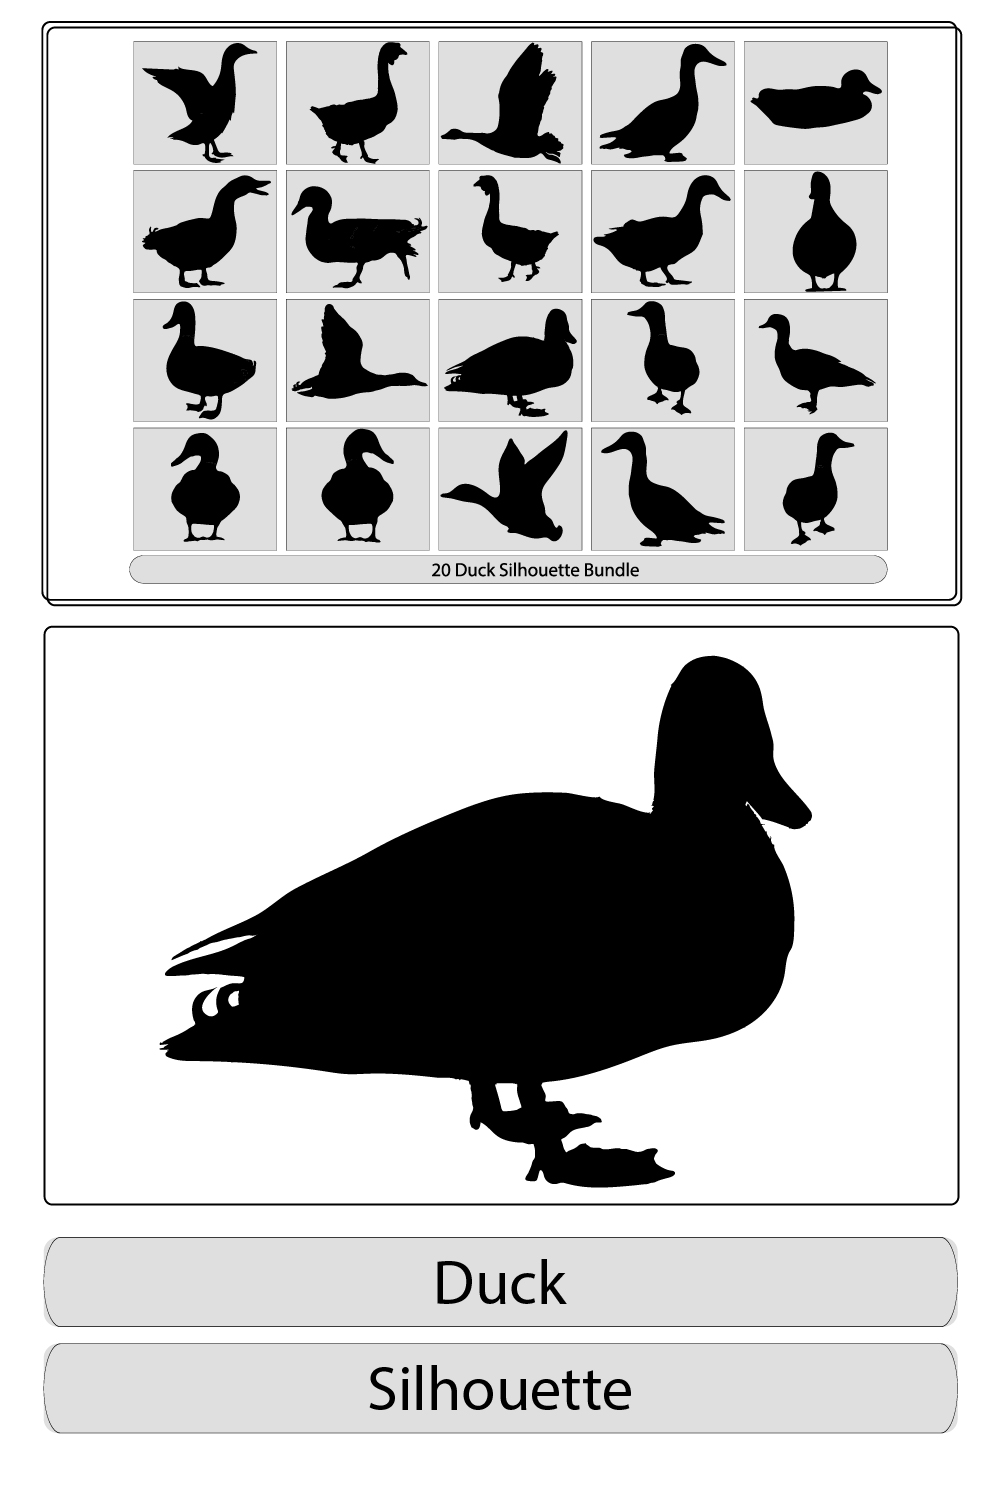 Silhouettes of wild and domestic duck, Duck in flight,silhouette of goose, duck, set,Real duck silhouette pinterest preview image.